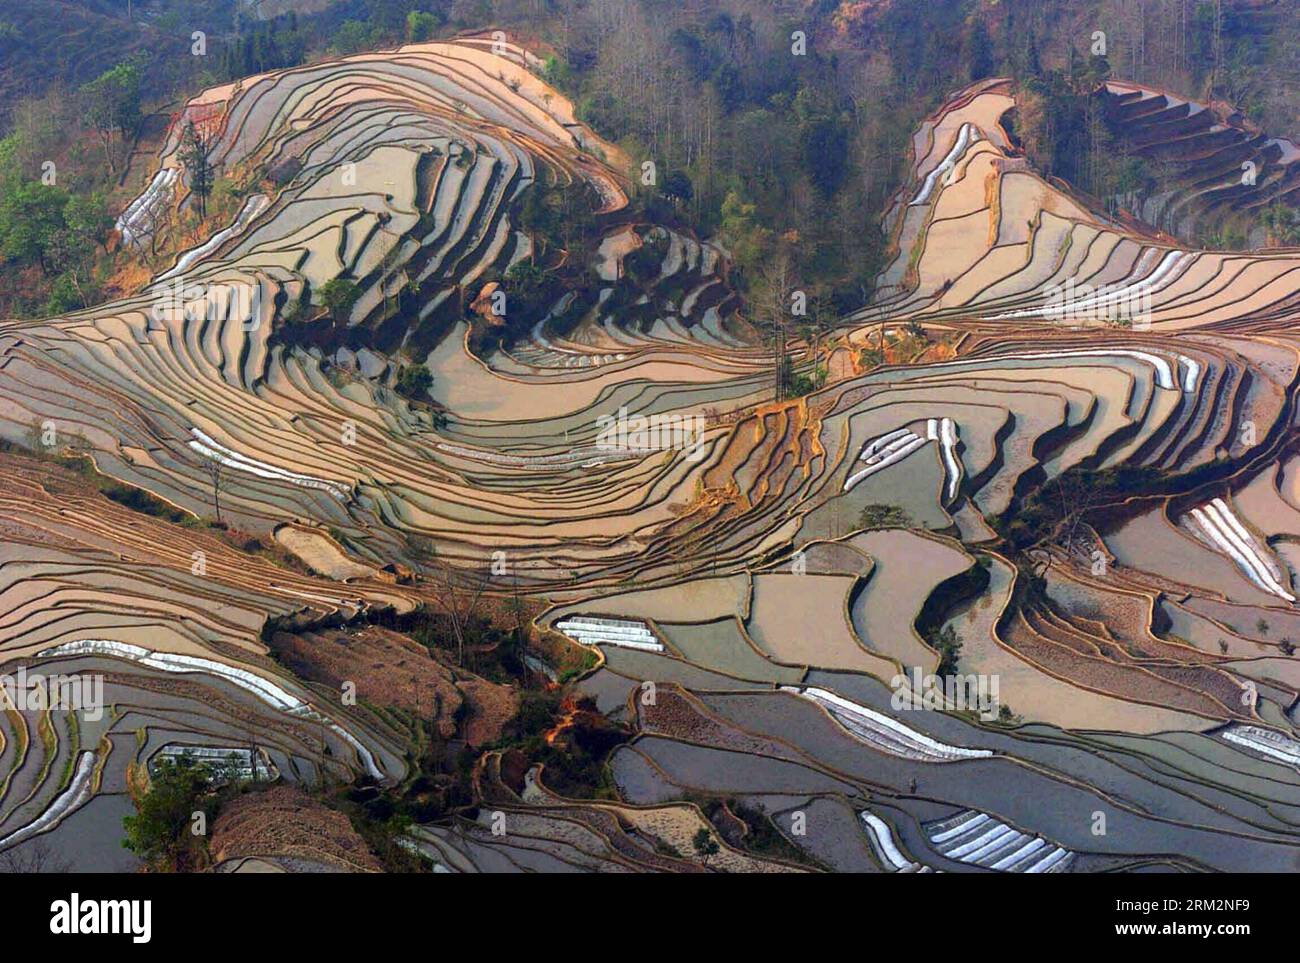 Bildnummer: 59888710  Datum: 14.02.2005  Copyright: imago/Xinhua BEIJING, - Photo take on February 14, 2005 shows the rice terraces in Yuanyang County of Honghe Prefecture, southwest China s Yunnan Province. The UNESCO s World Heritage Committee inscribed China s cultural landscape of Honghe Hani Rice Terraces onto the prestigious World Heritage List on Saturday, bringing the total number of World Heritage Sites in China to 45. (Xinhua/Lin Yiguang) (zwx) CHINA-YUNNAN-HONGHE HANI RICE TERRACES-WORLD HERITAGE LIST(CN) PUBLICATIONxNOTxINxCHN Gesellschaft Totale Landschaft Reisterassen Weltkulture Stock Photo